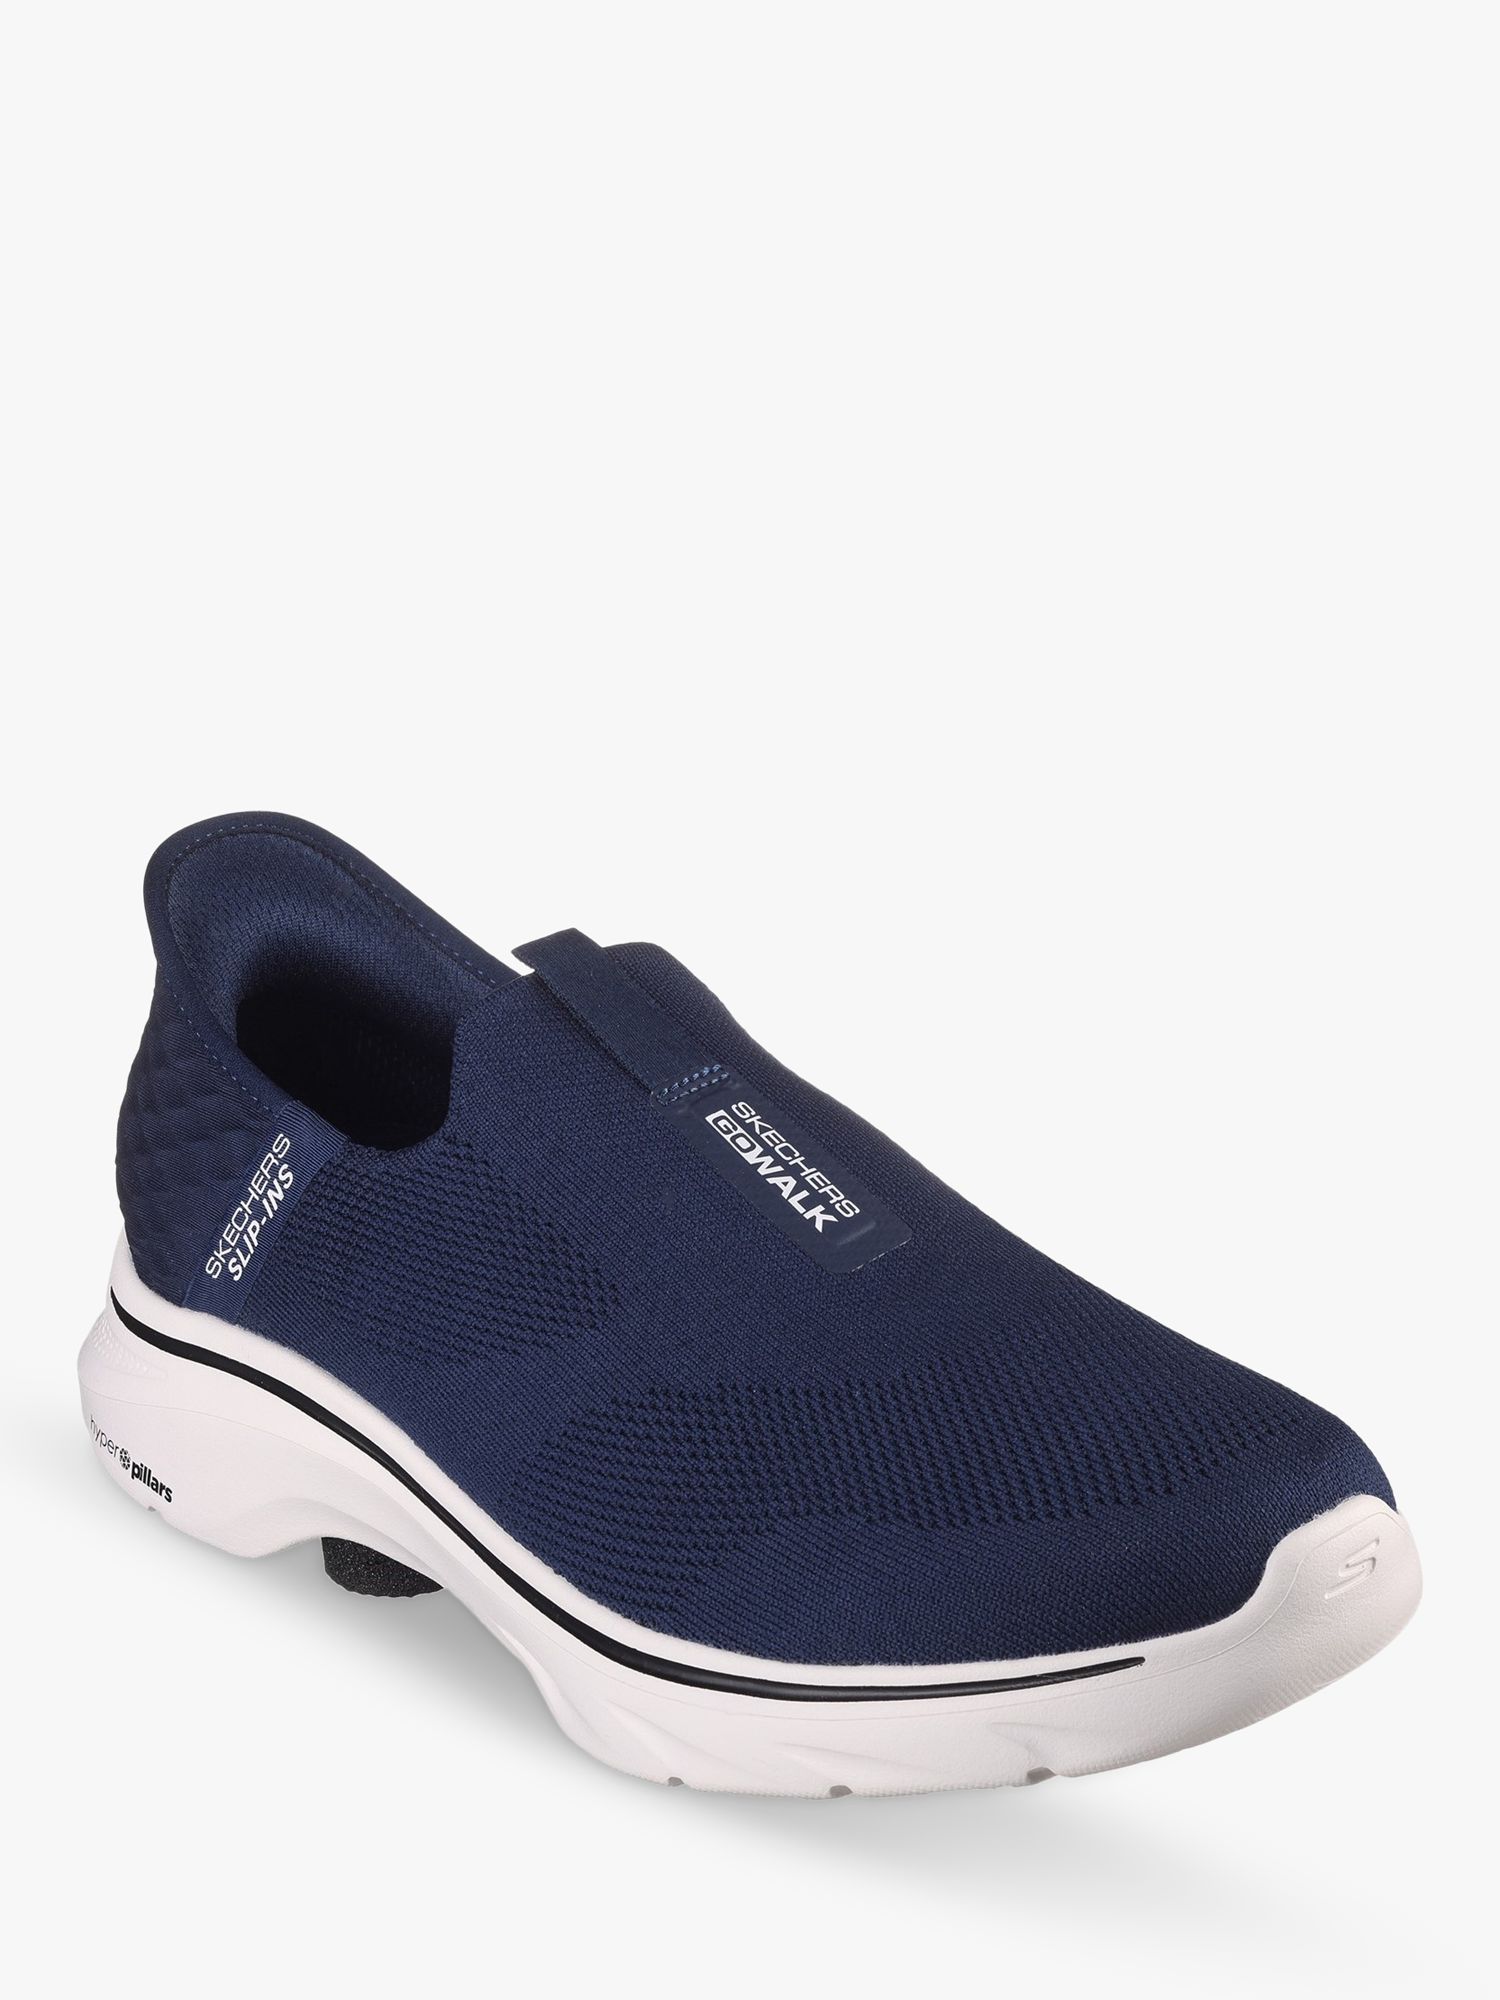 Skechers Go Walk 7 Easy On 2 Trainers, Navy at John Lewis & Partners